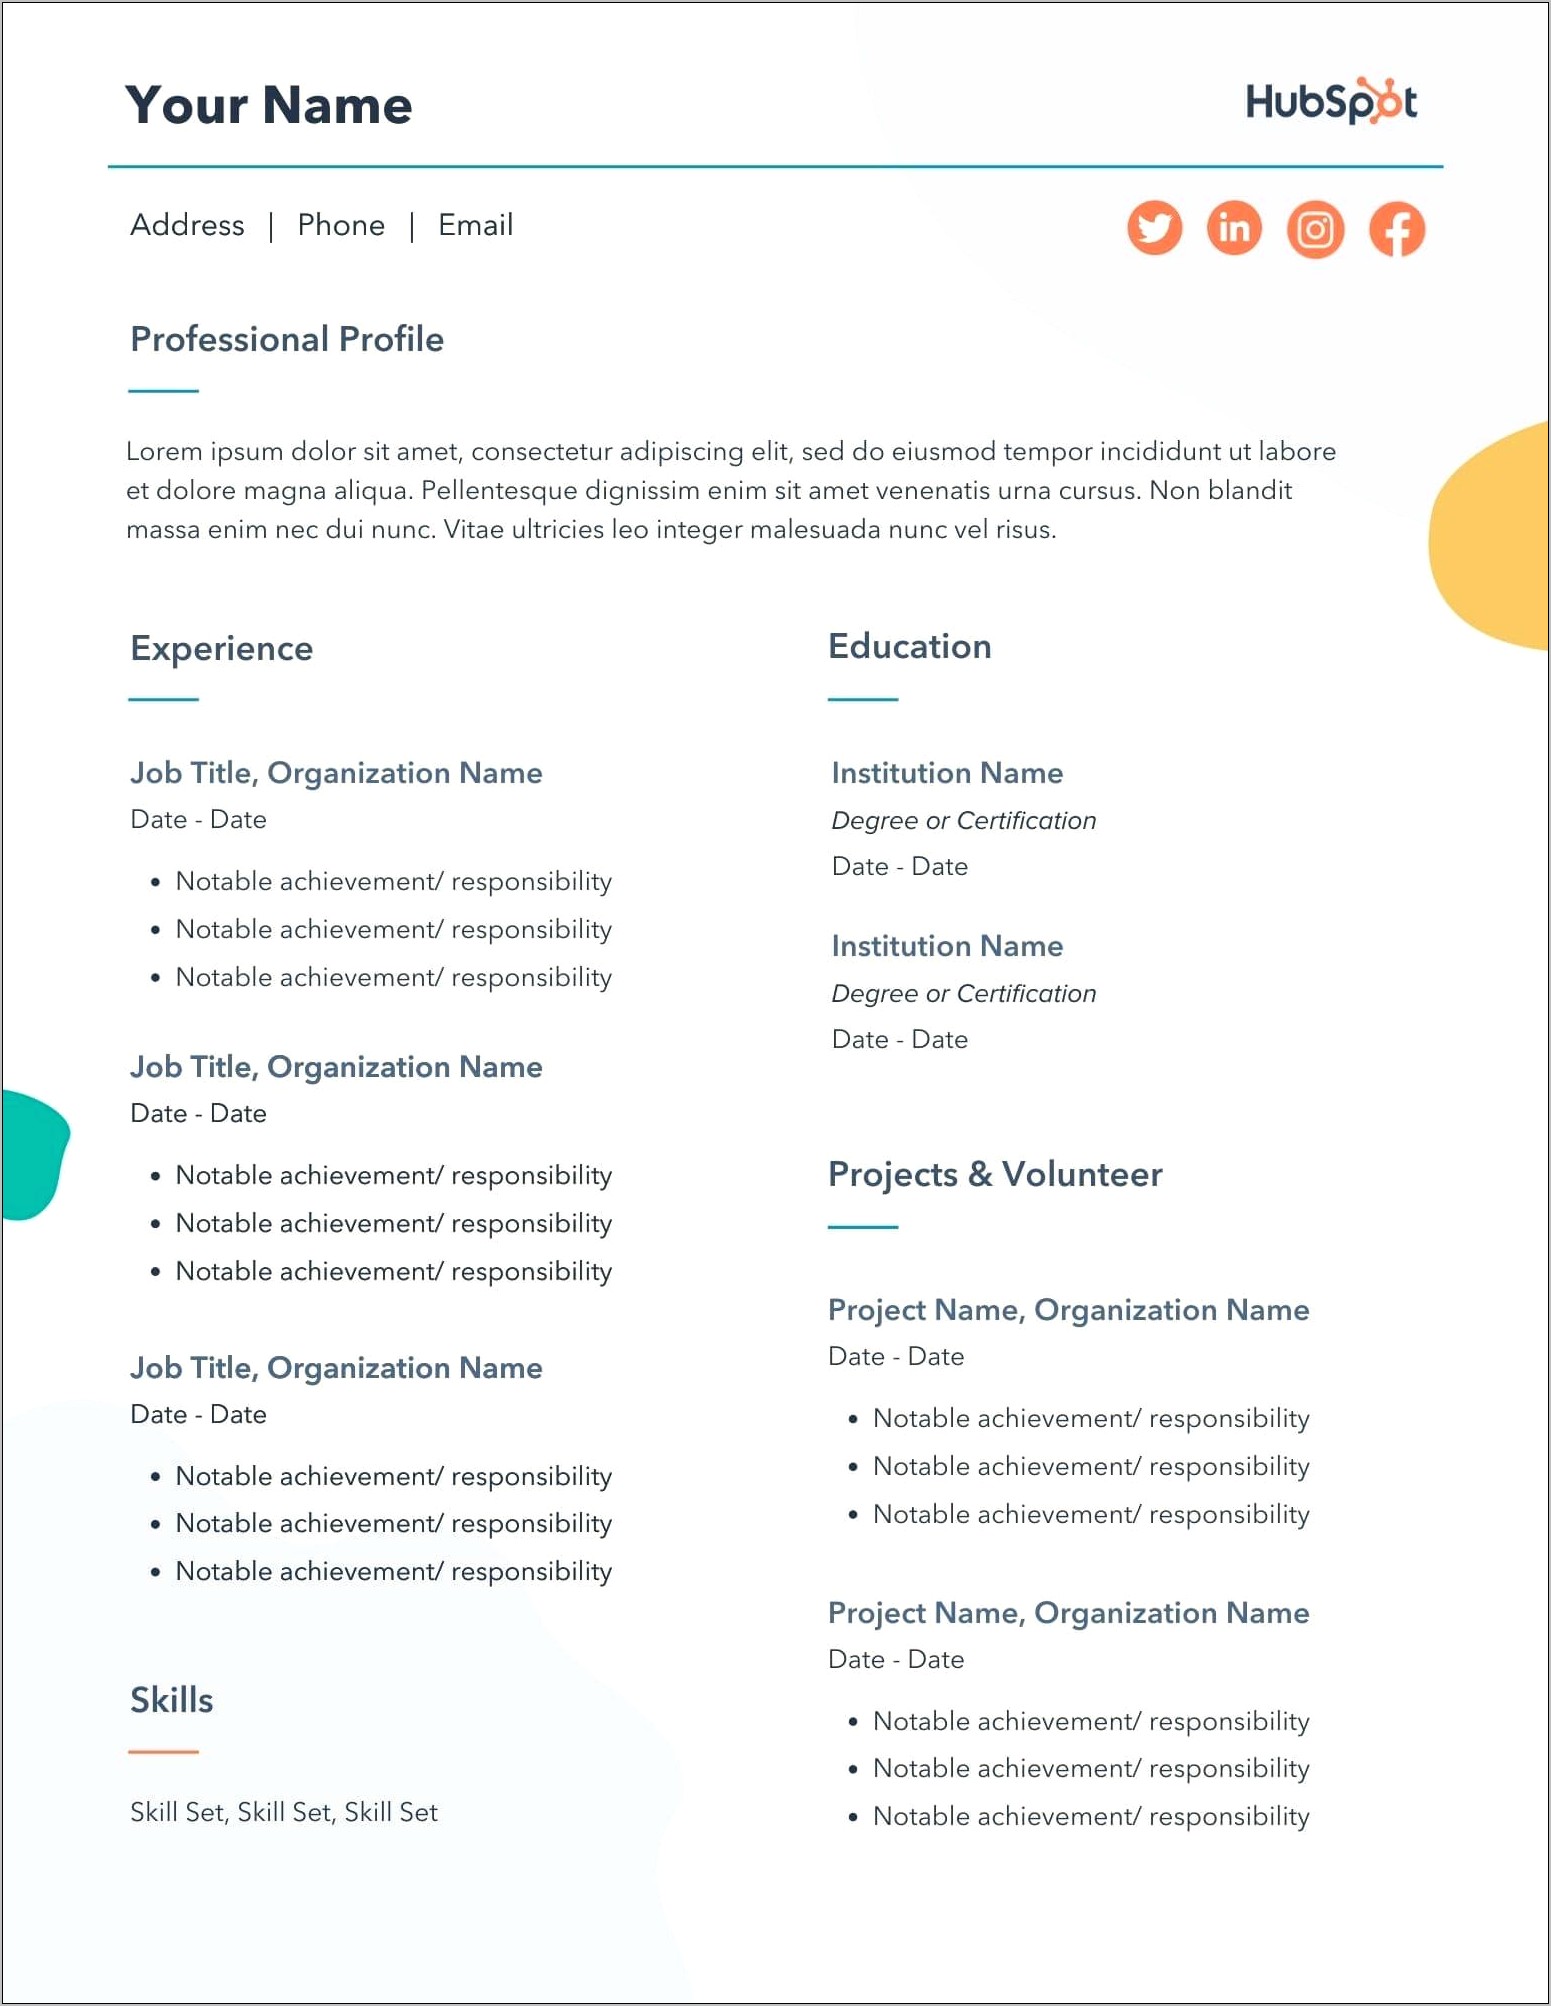 Ms Word It Support Resume Templets